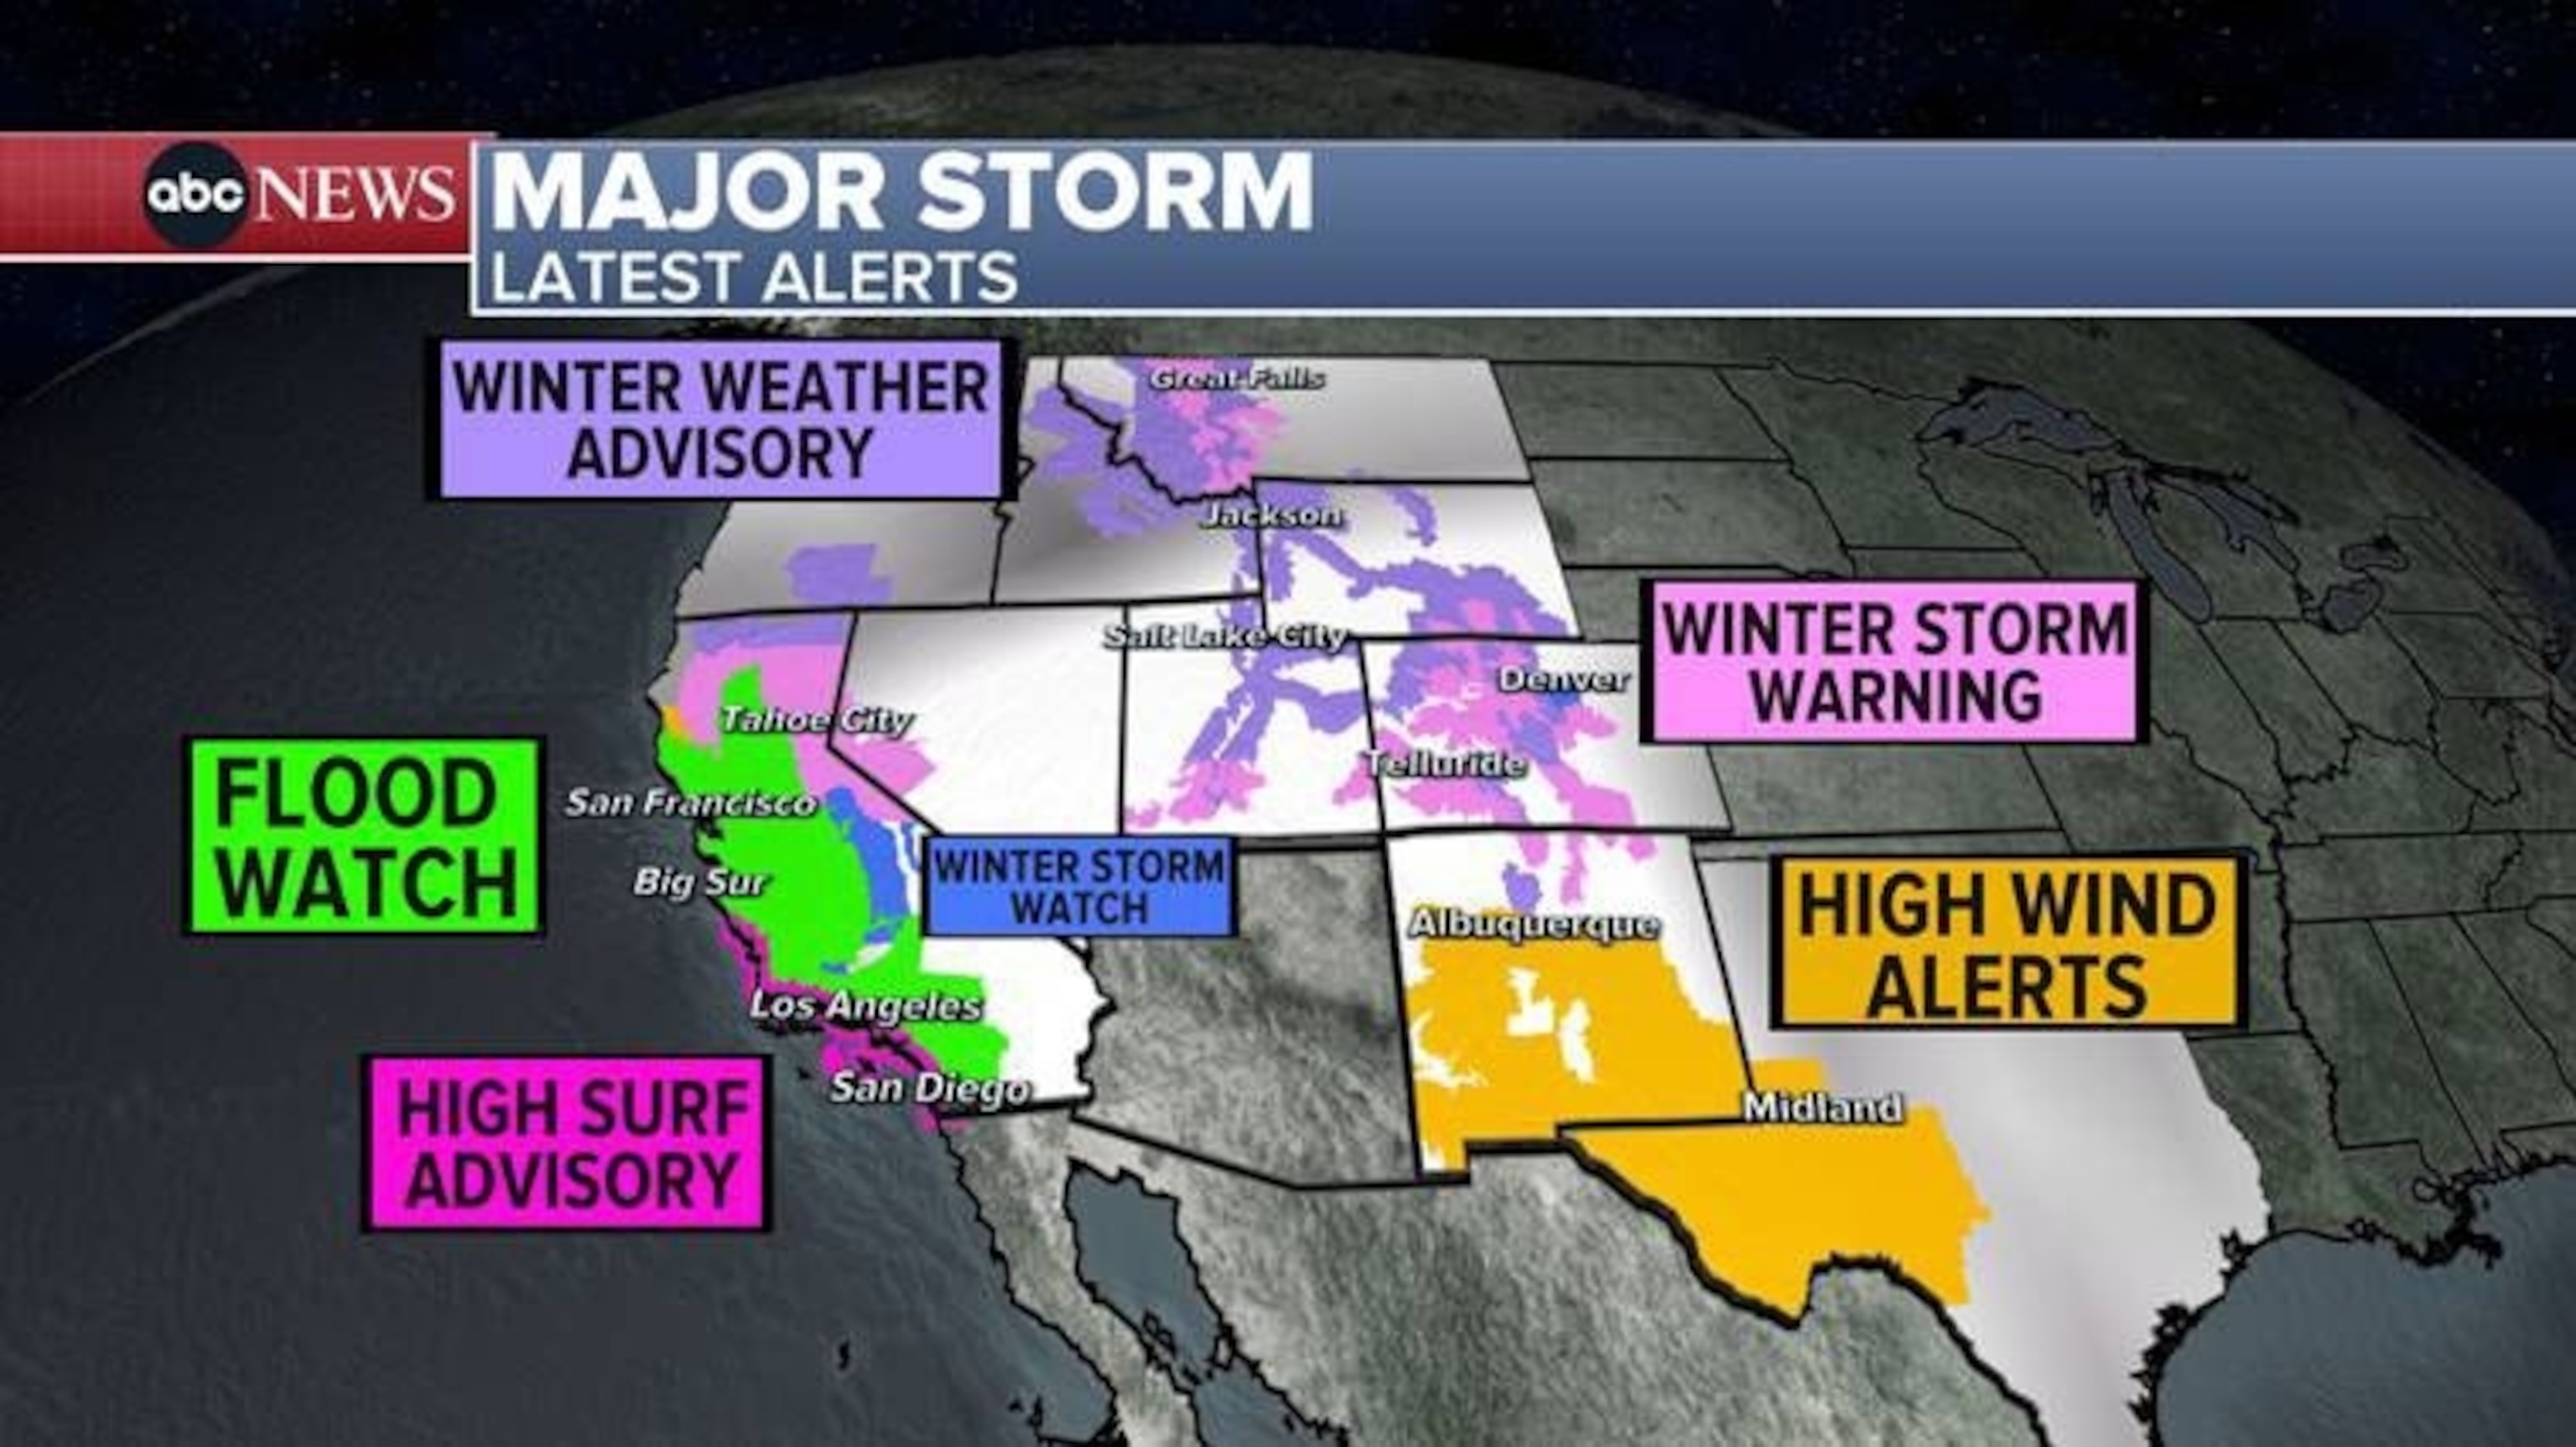 PHOTO: Storm alerts map weather graphic